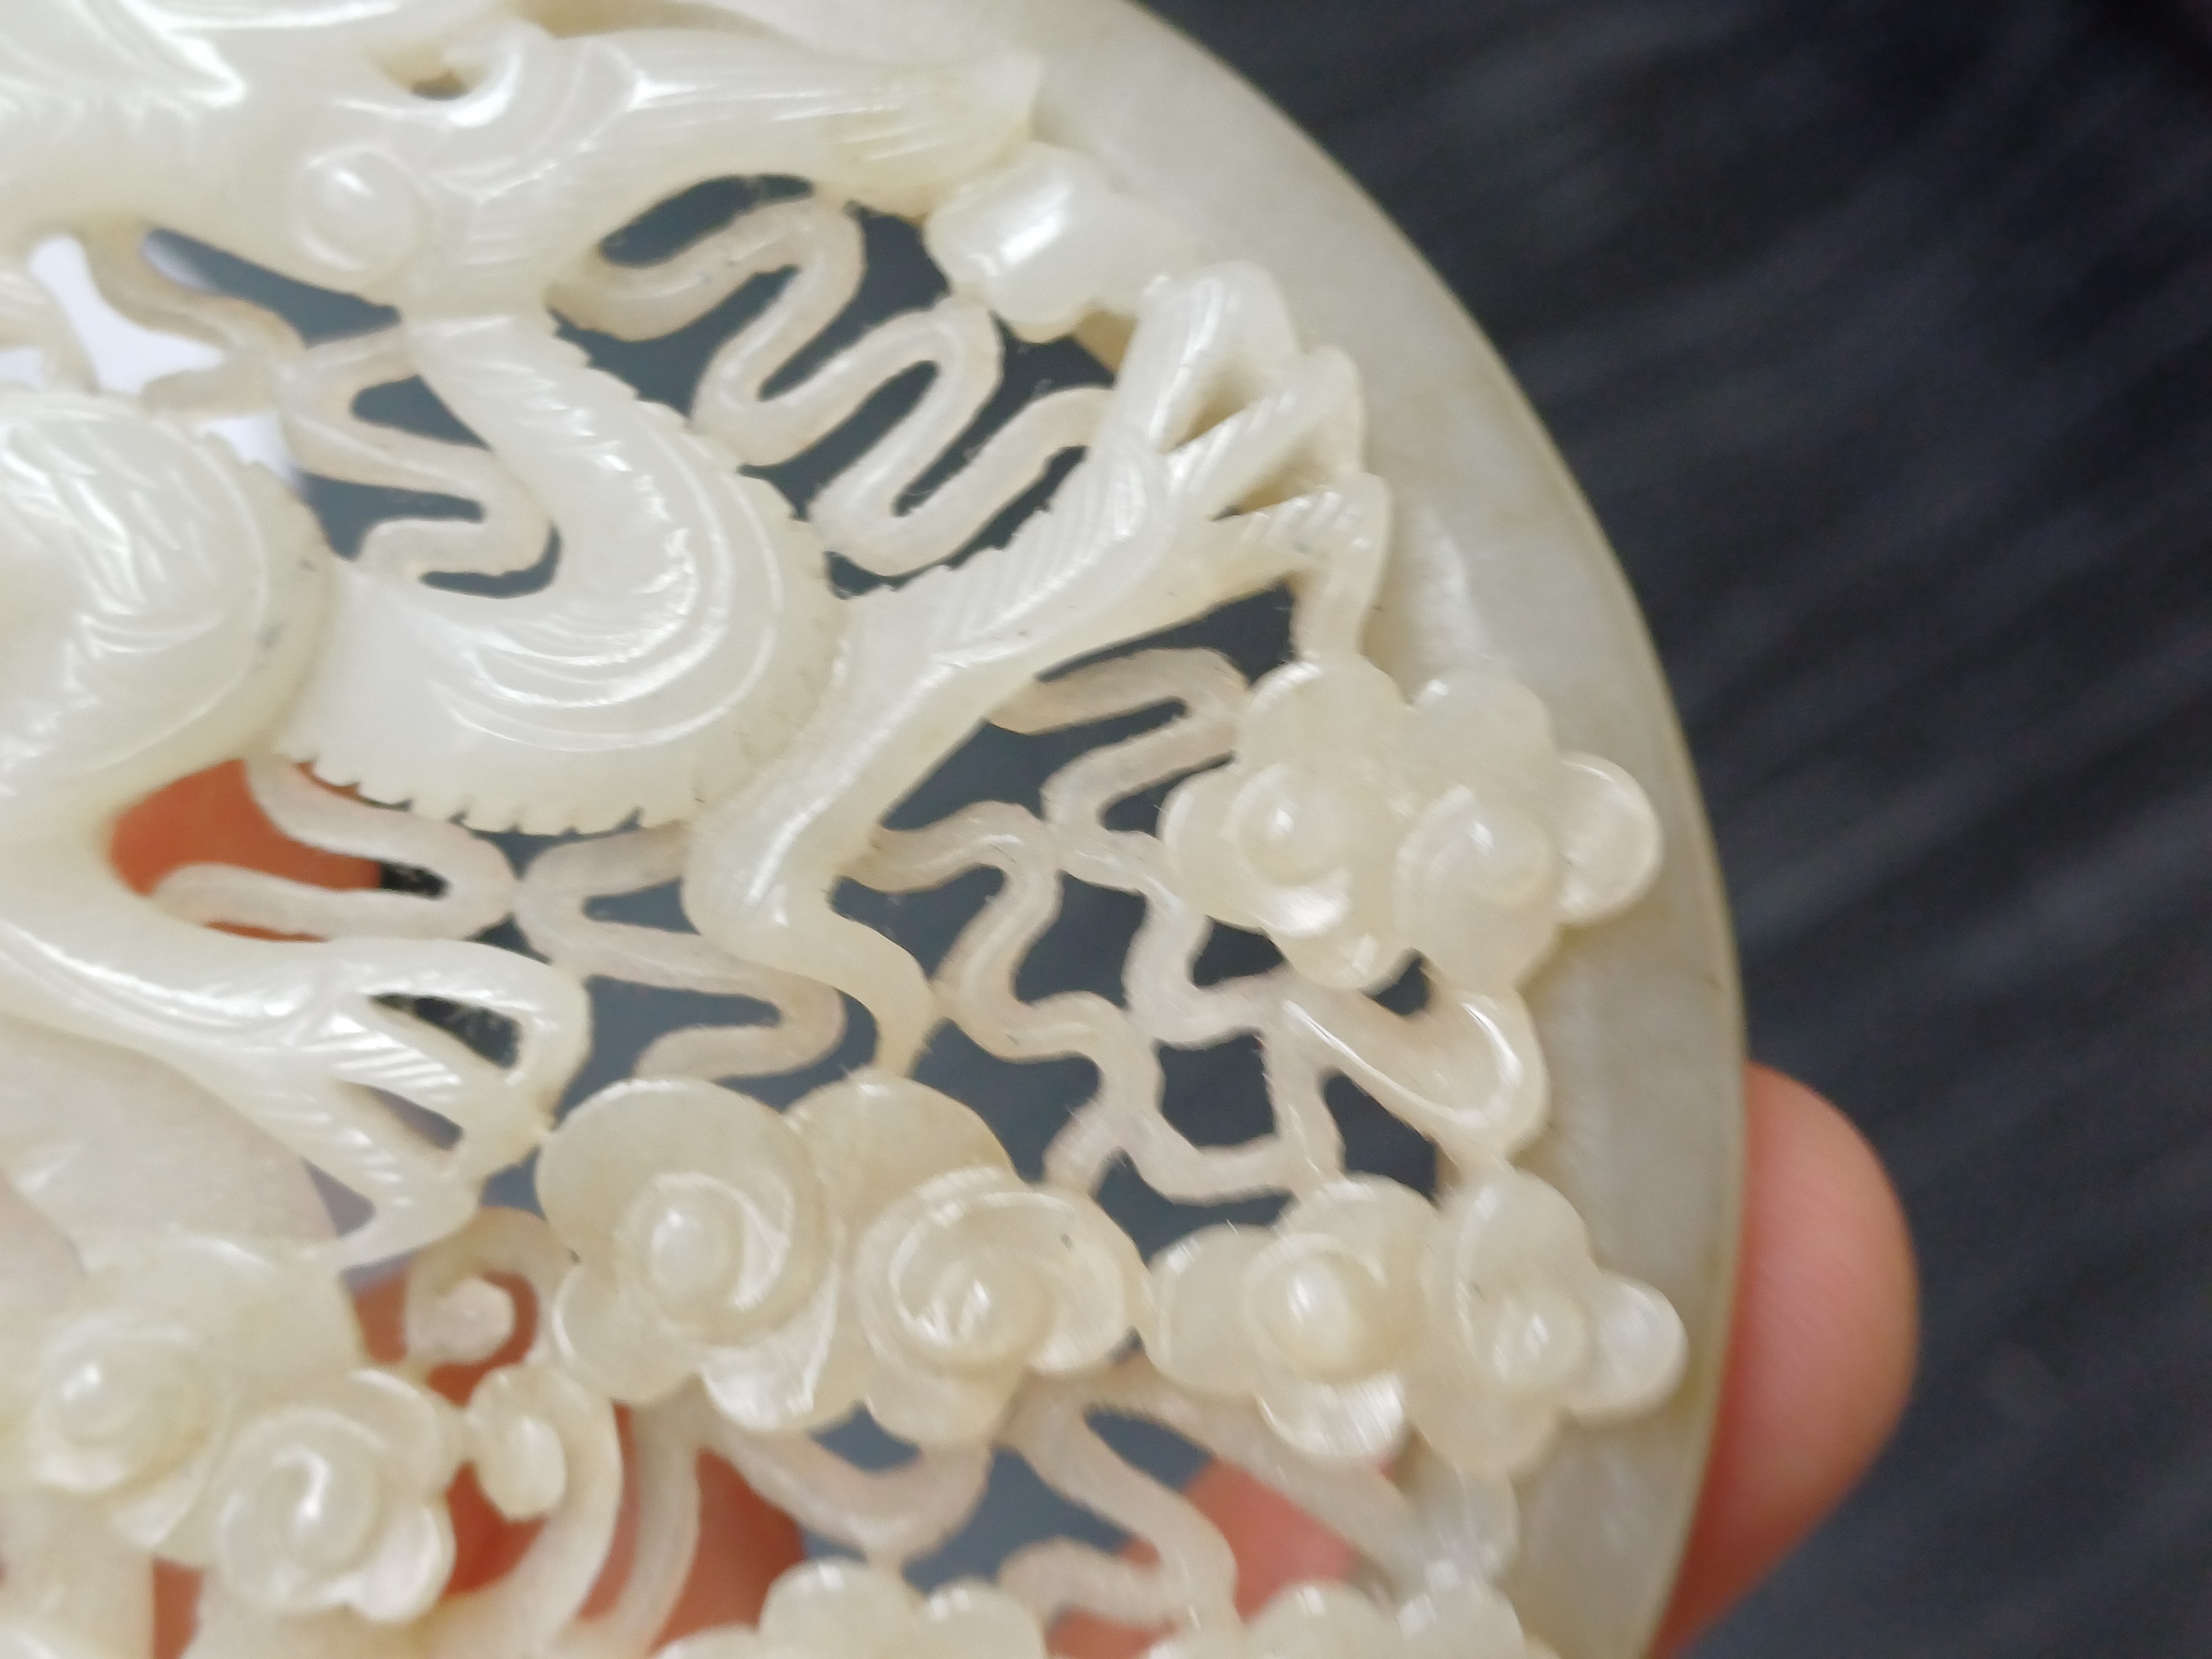 A CHINESE RETICULATED WHITE AND RUSSET JADE 'DRAGON' ROUND PLAQUE 十九世紀 白玉糖色龍趕珠紋珮 - Image 4 of 10